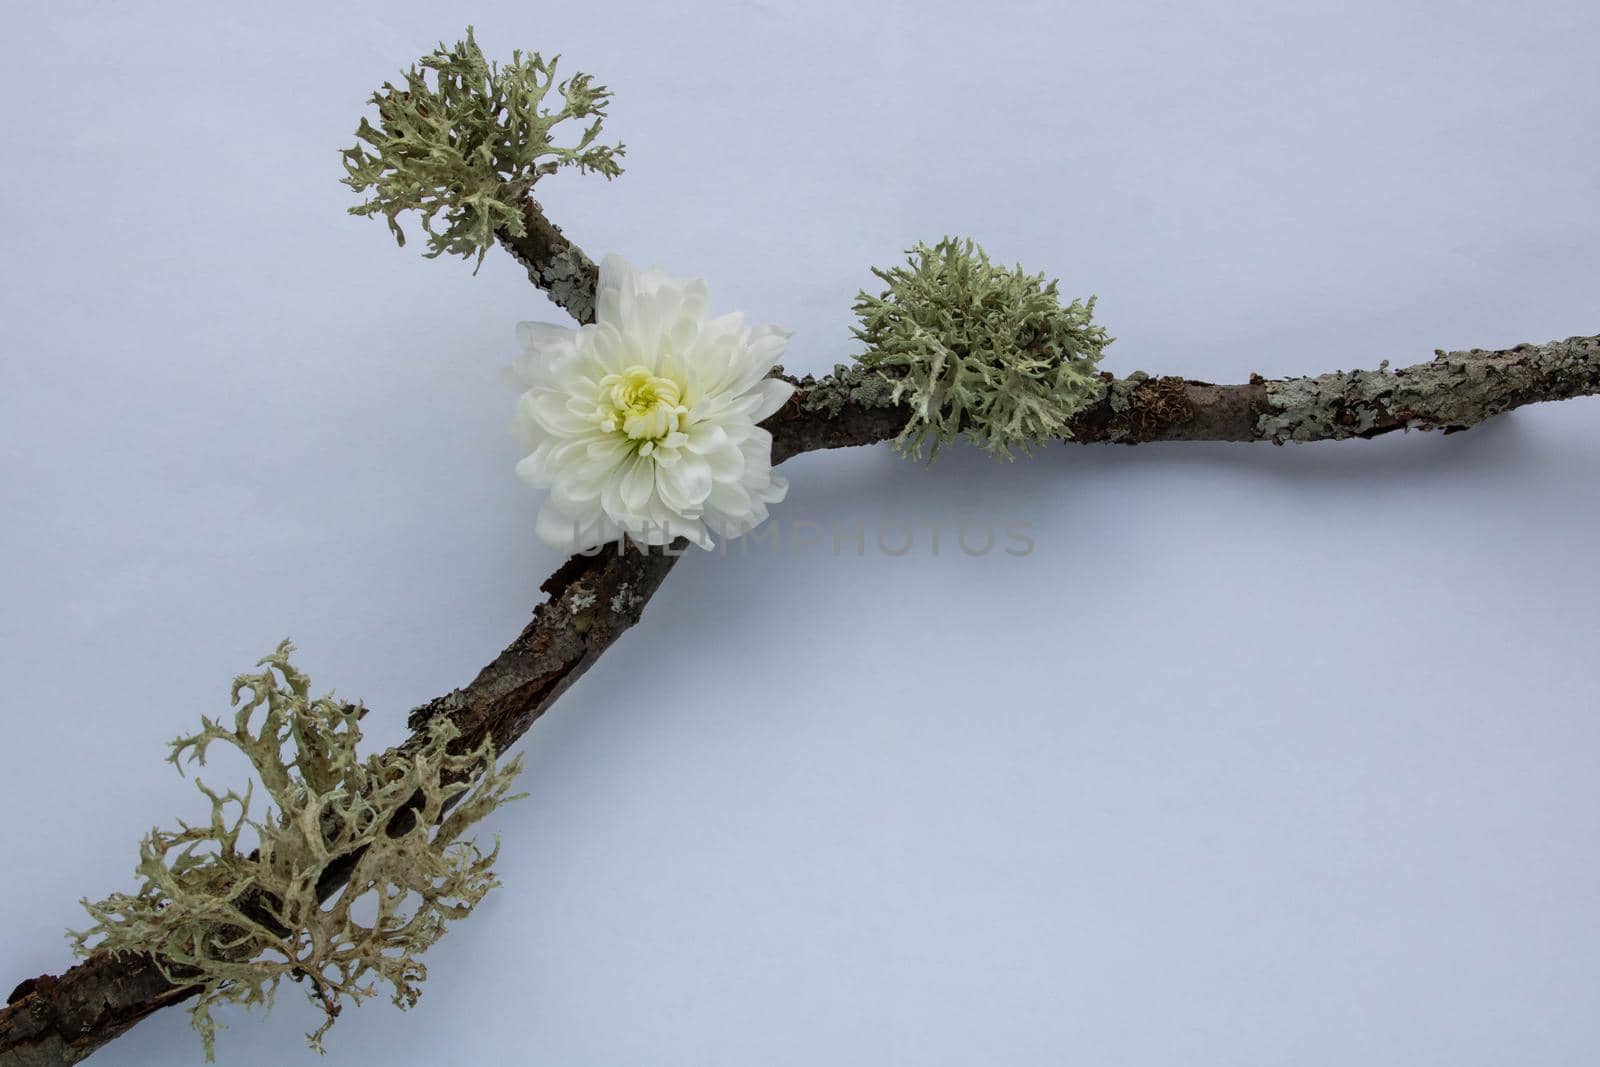 dry branch, moss and white chrysanthemum on a white background by lapushka62